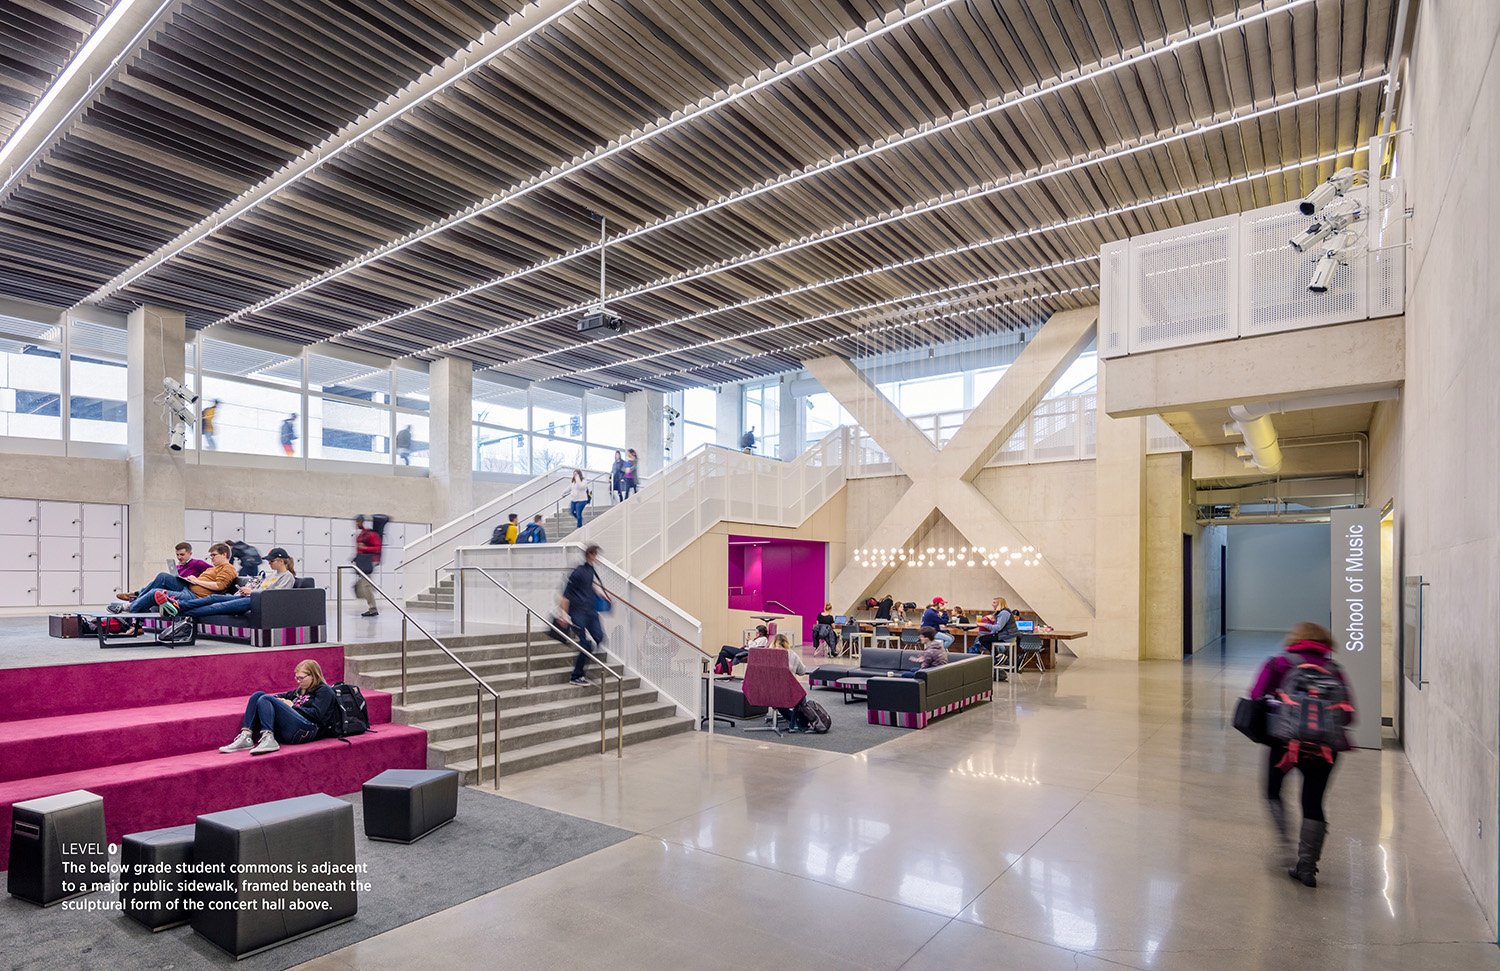 The below grade student commons is adjacent to a major public sidewalk, framed beneath the sculptural form of the concert hall above. | Tim Griffith